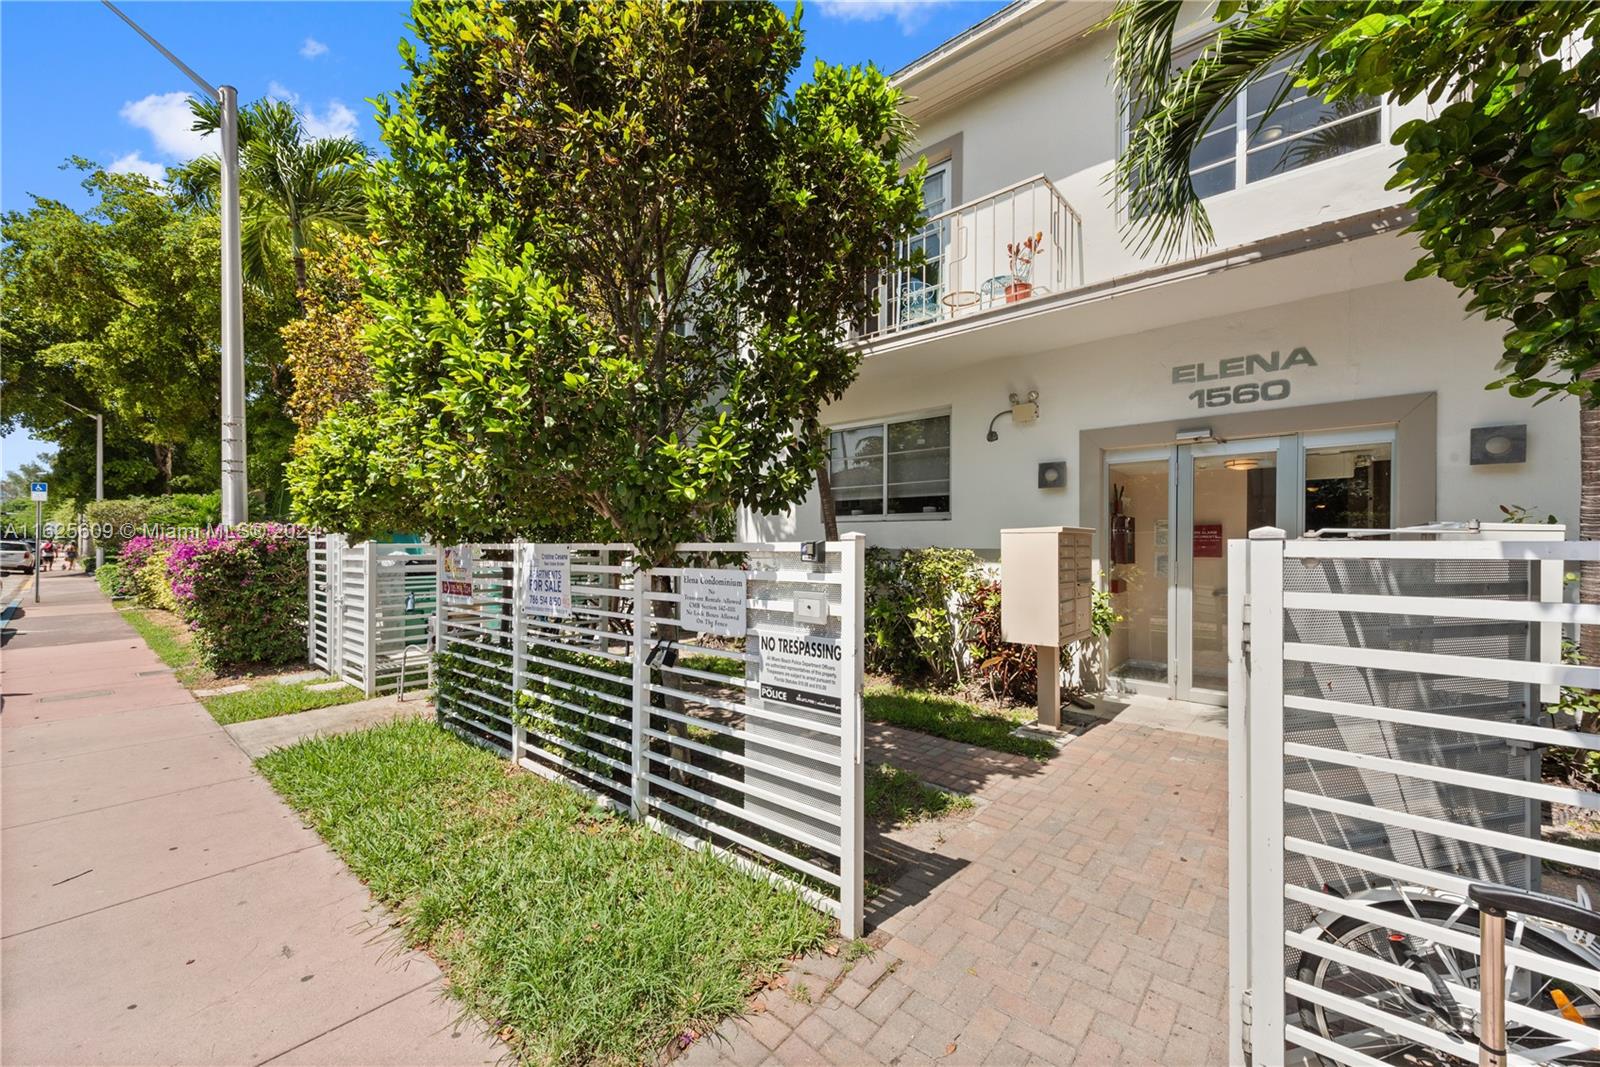 Live in the heart of South Beach in this beautifully converted charming Art Deco building. This unit was renovated 8 years ago and comes furnished. This unit includes basic cable and internet. Unit has a new washer / dryer in unit and updated windows. A wonderful perk that any new tenant would like! This cozy unit has all the comforts of  a home. 1560 Meridian is centrally located and just a few minute walk to Lincoln Road, Flamingo Park, Alto Road and Trader Joes. A true pied a terre. **There is a new couch bought, not shown in picture** Please review Broker remarks.